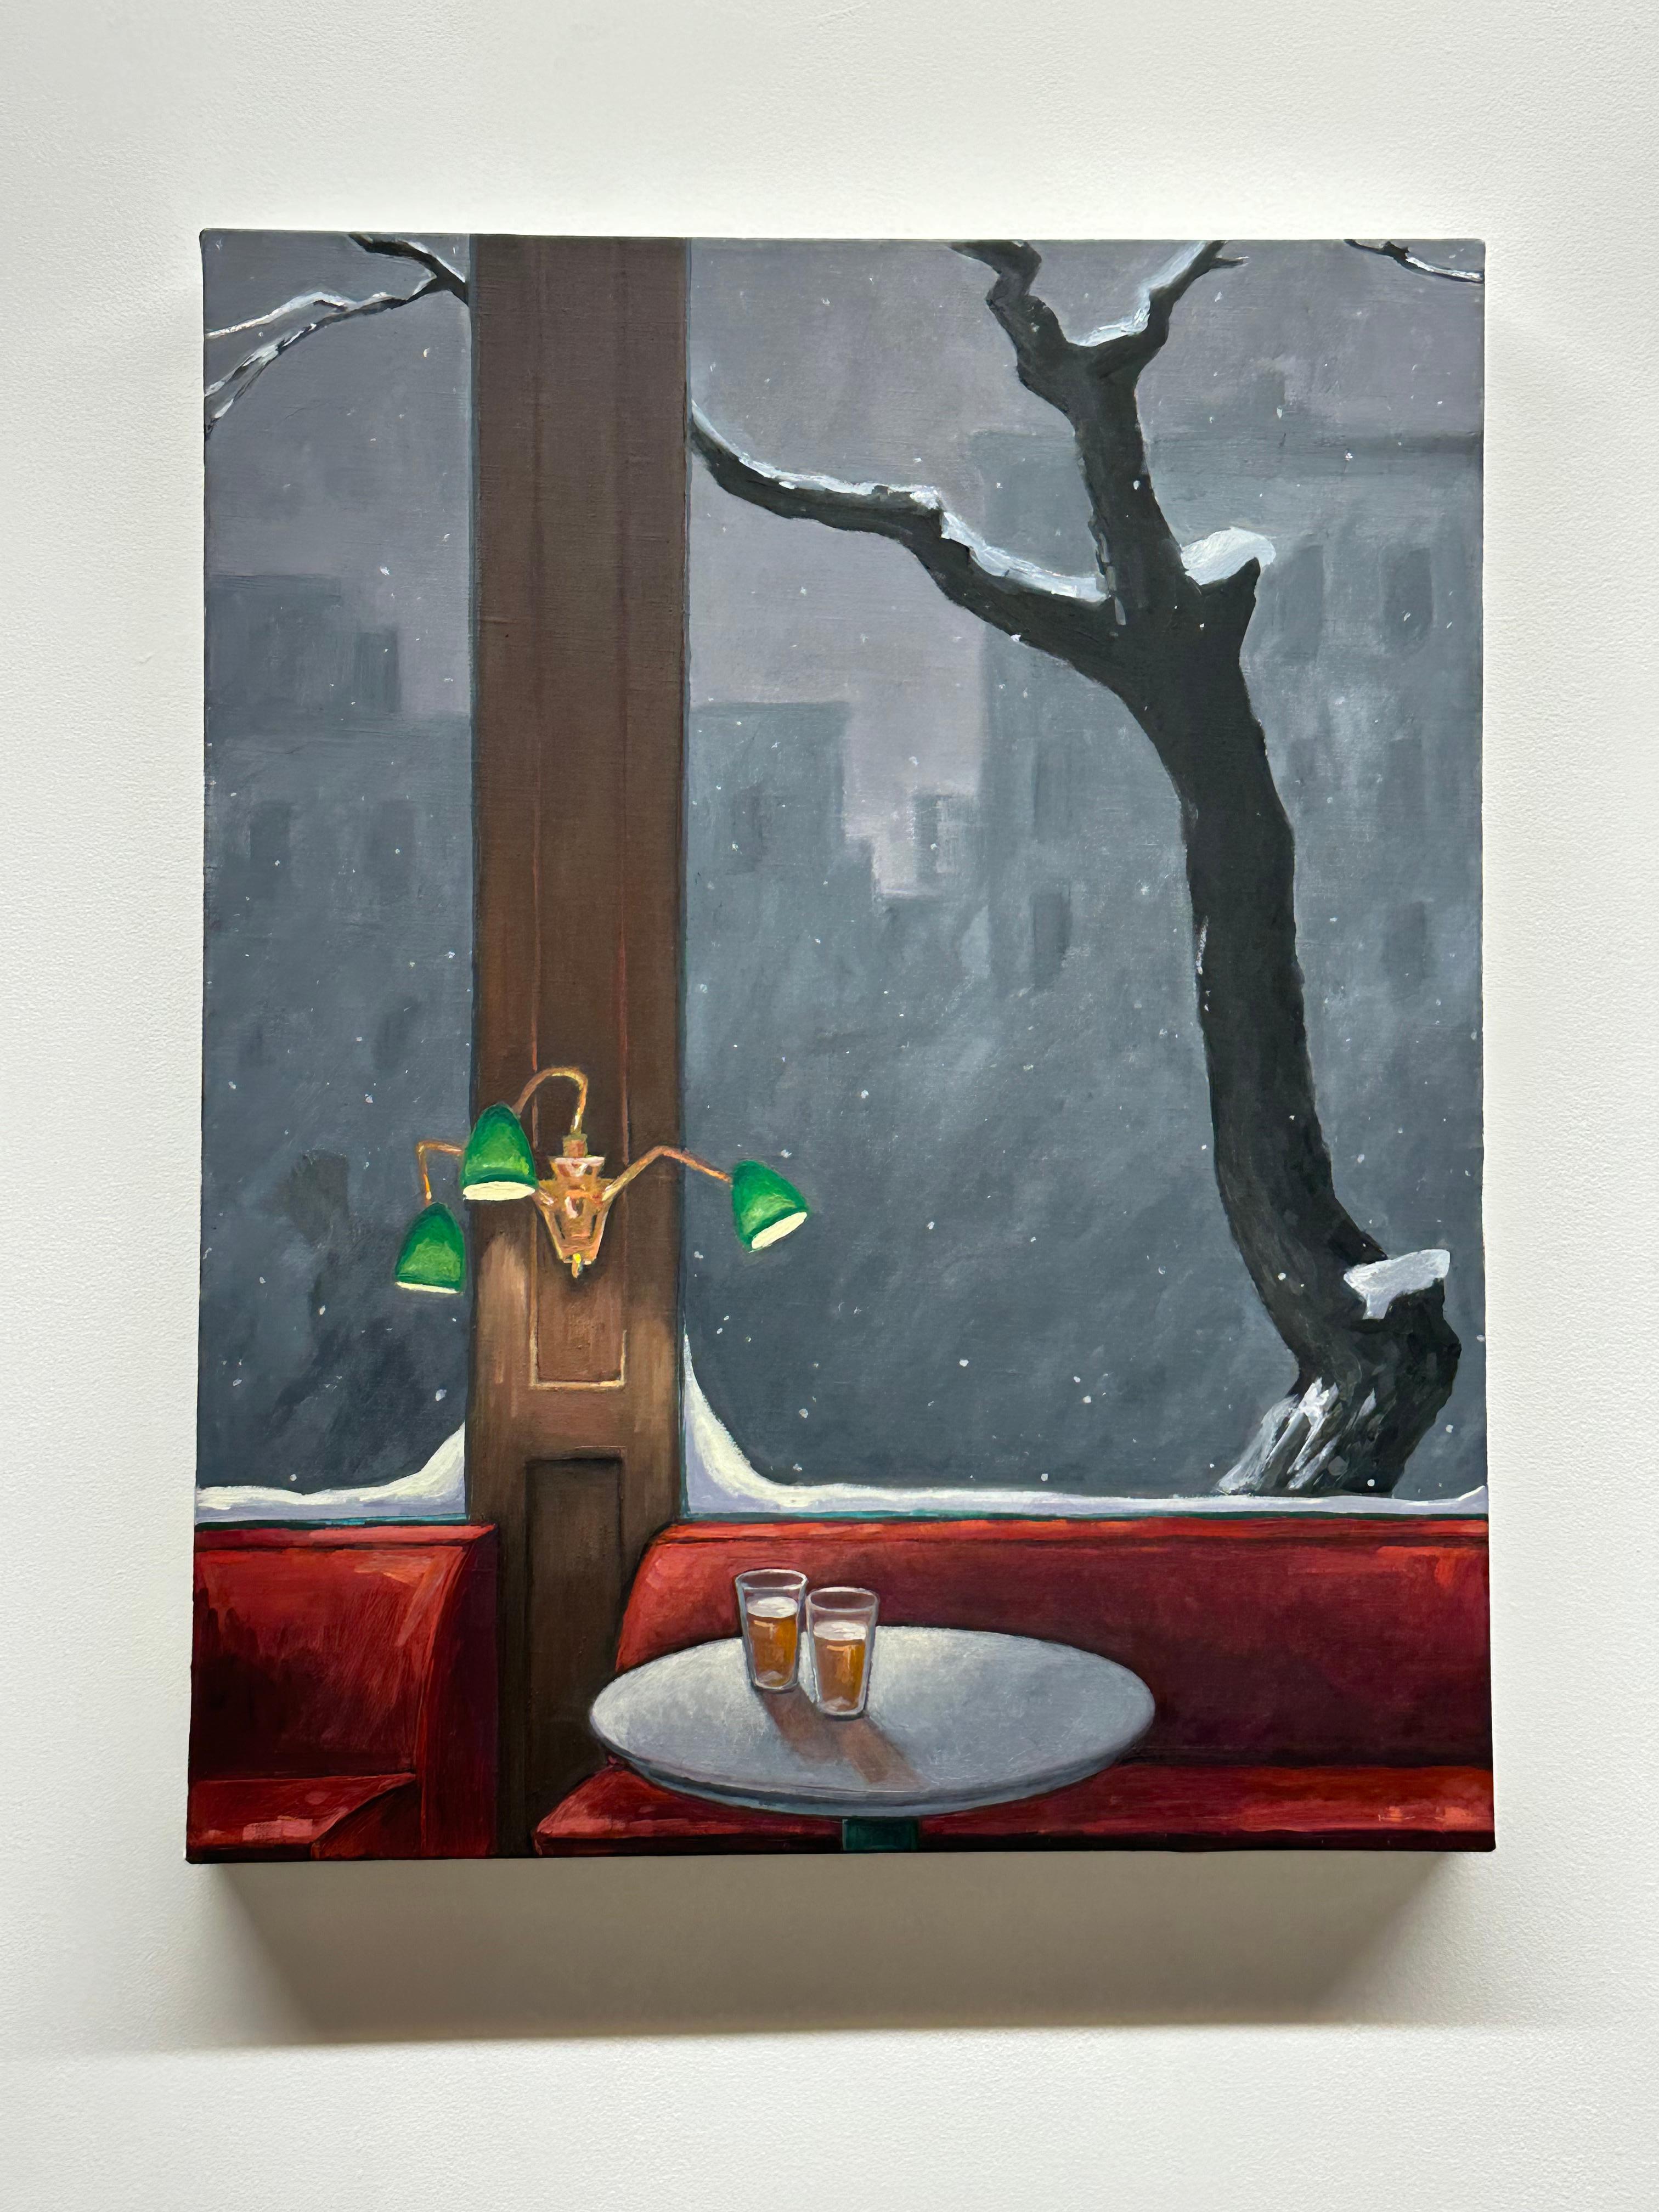 Two Beers, Green Lamps, Dark Red, Glasses, Snow Outside, Winter Bar Still Life - Painting by KK Kozik